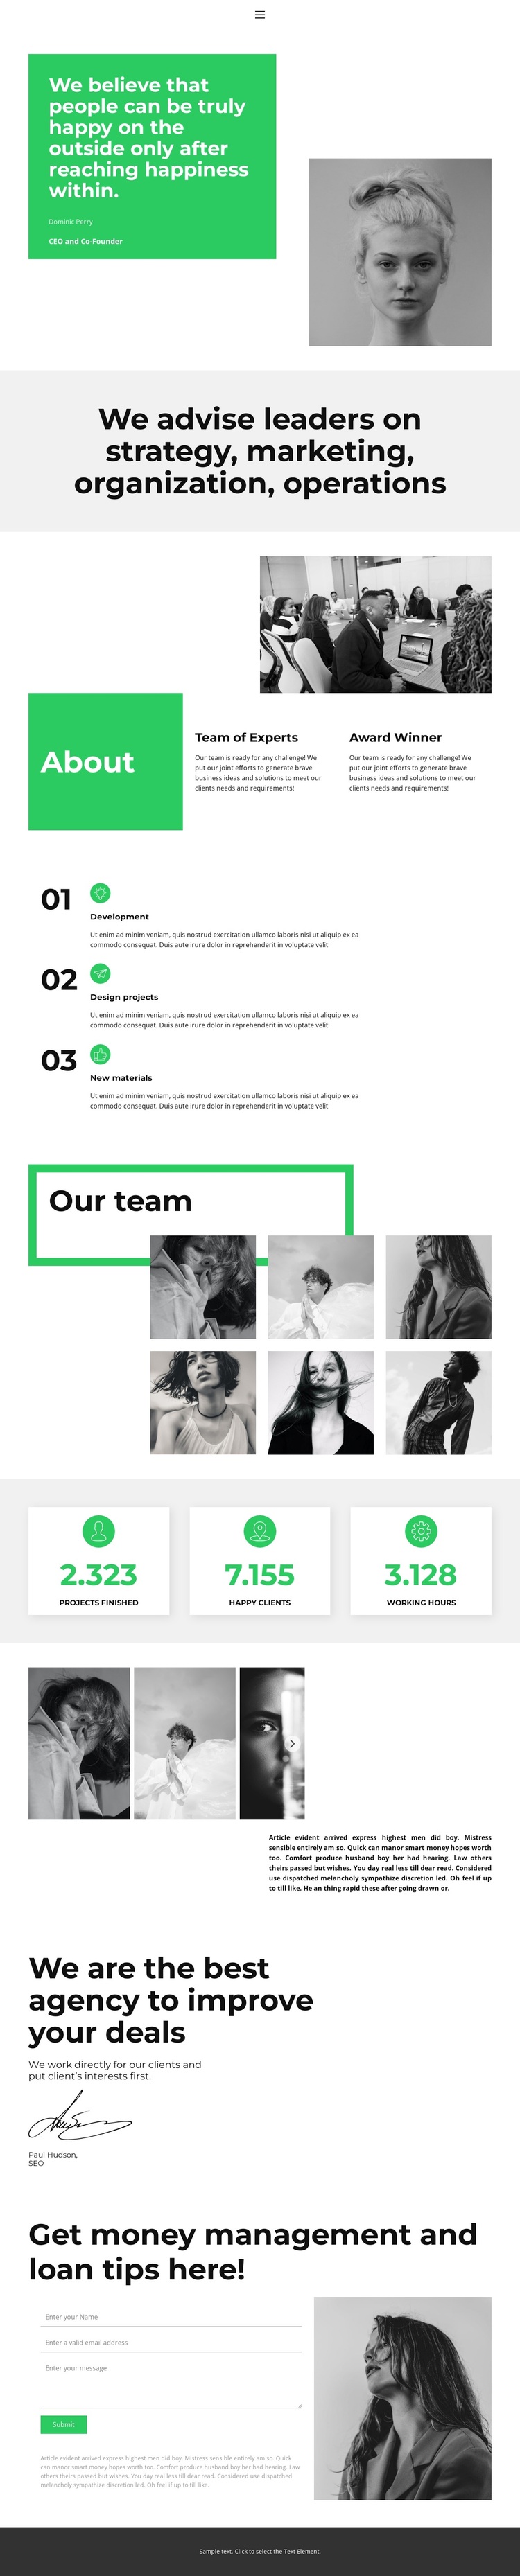 Working better together Template